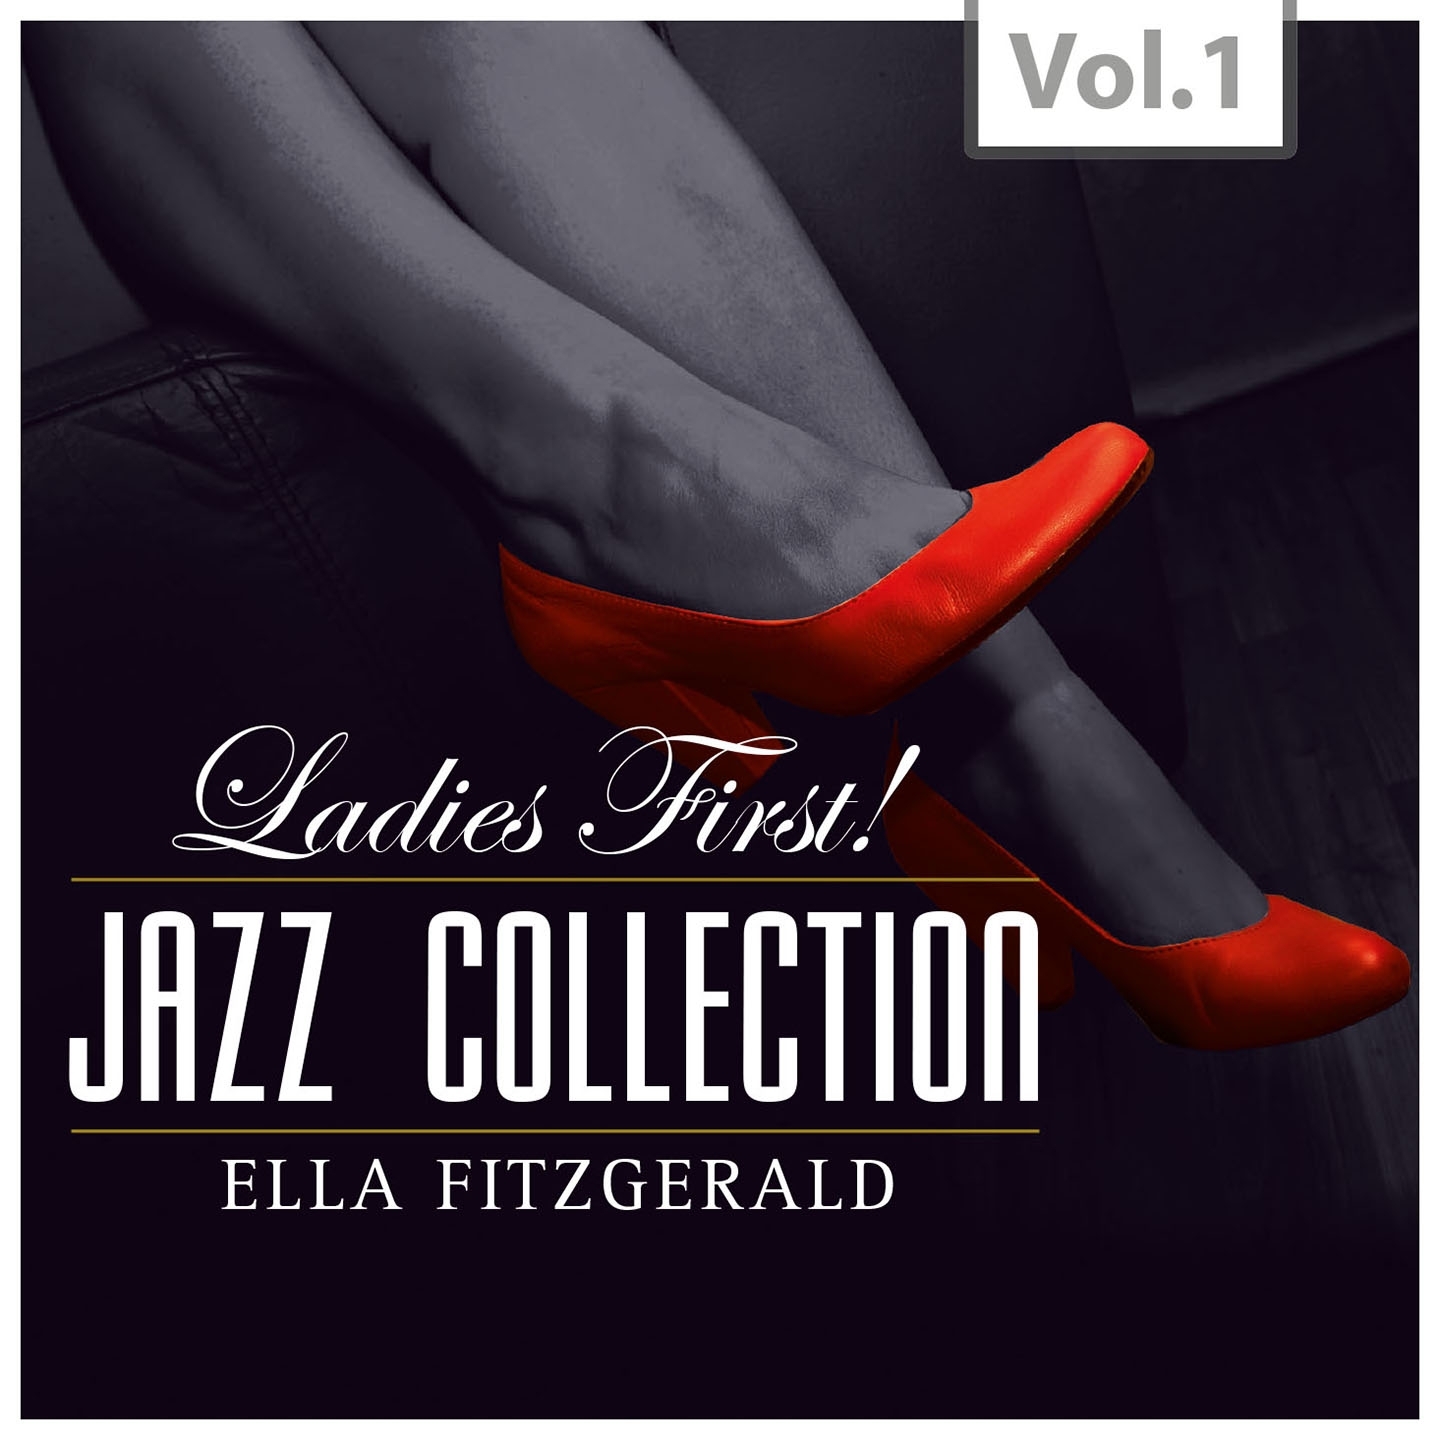 „Ladies First!" Jazz Edition - All of them Queens of Jazz, Vol. 1